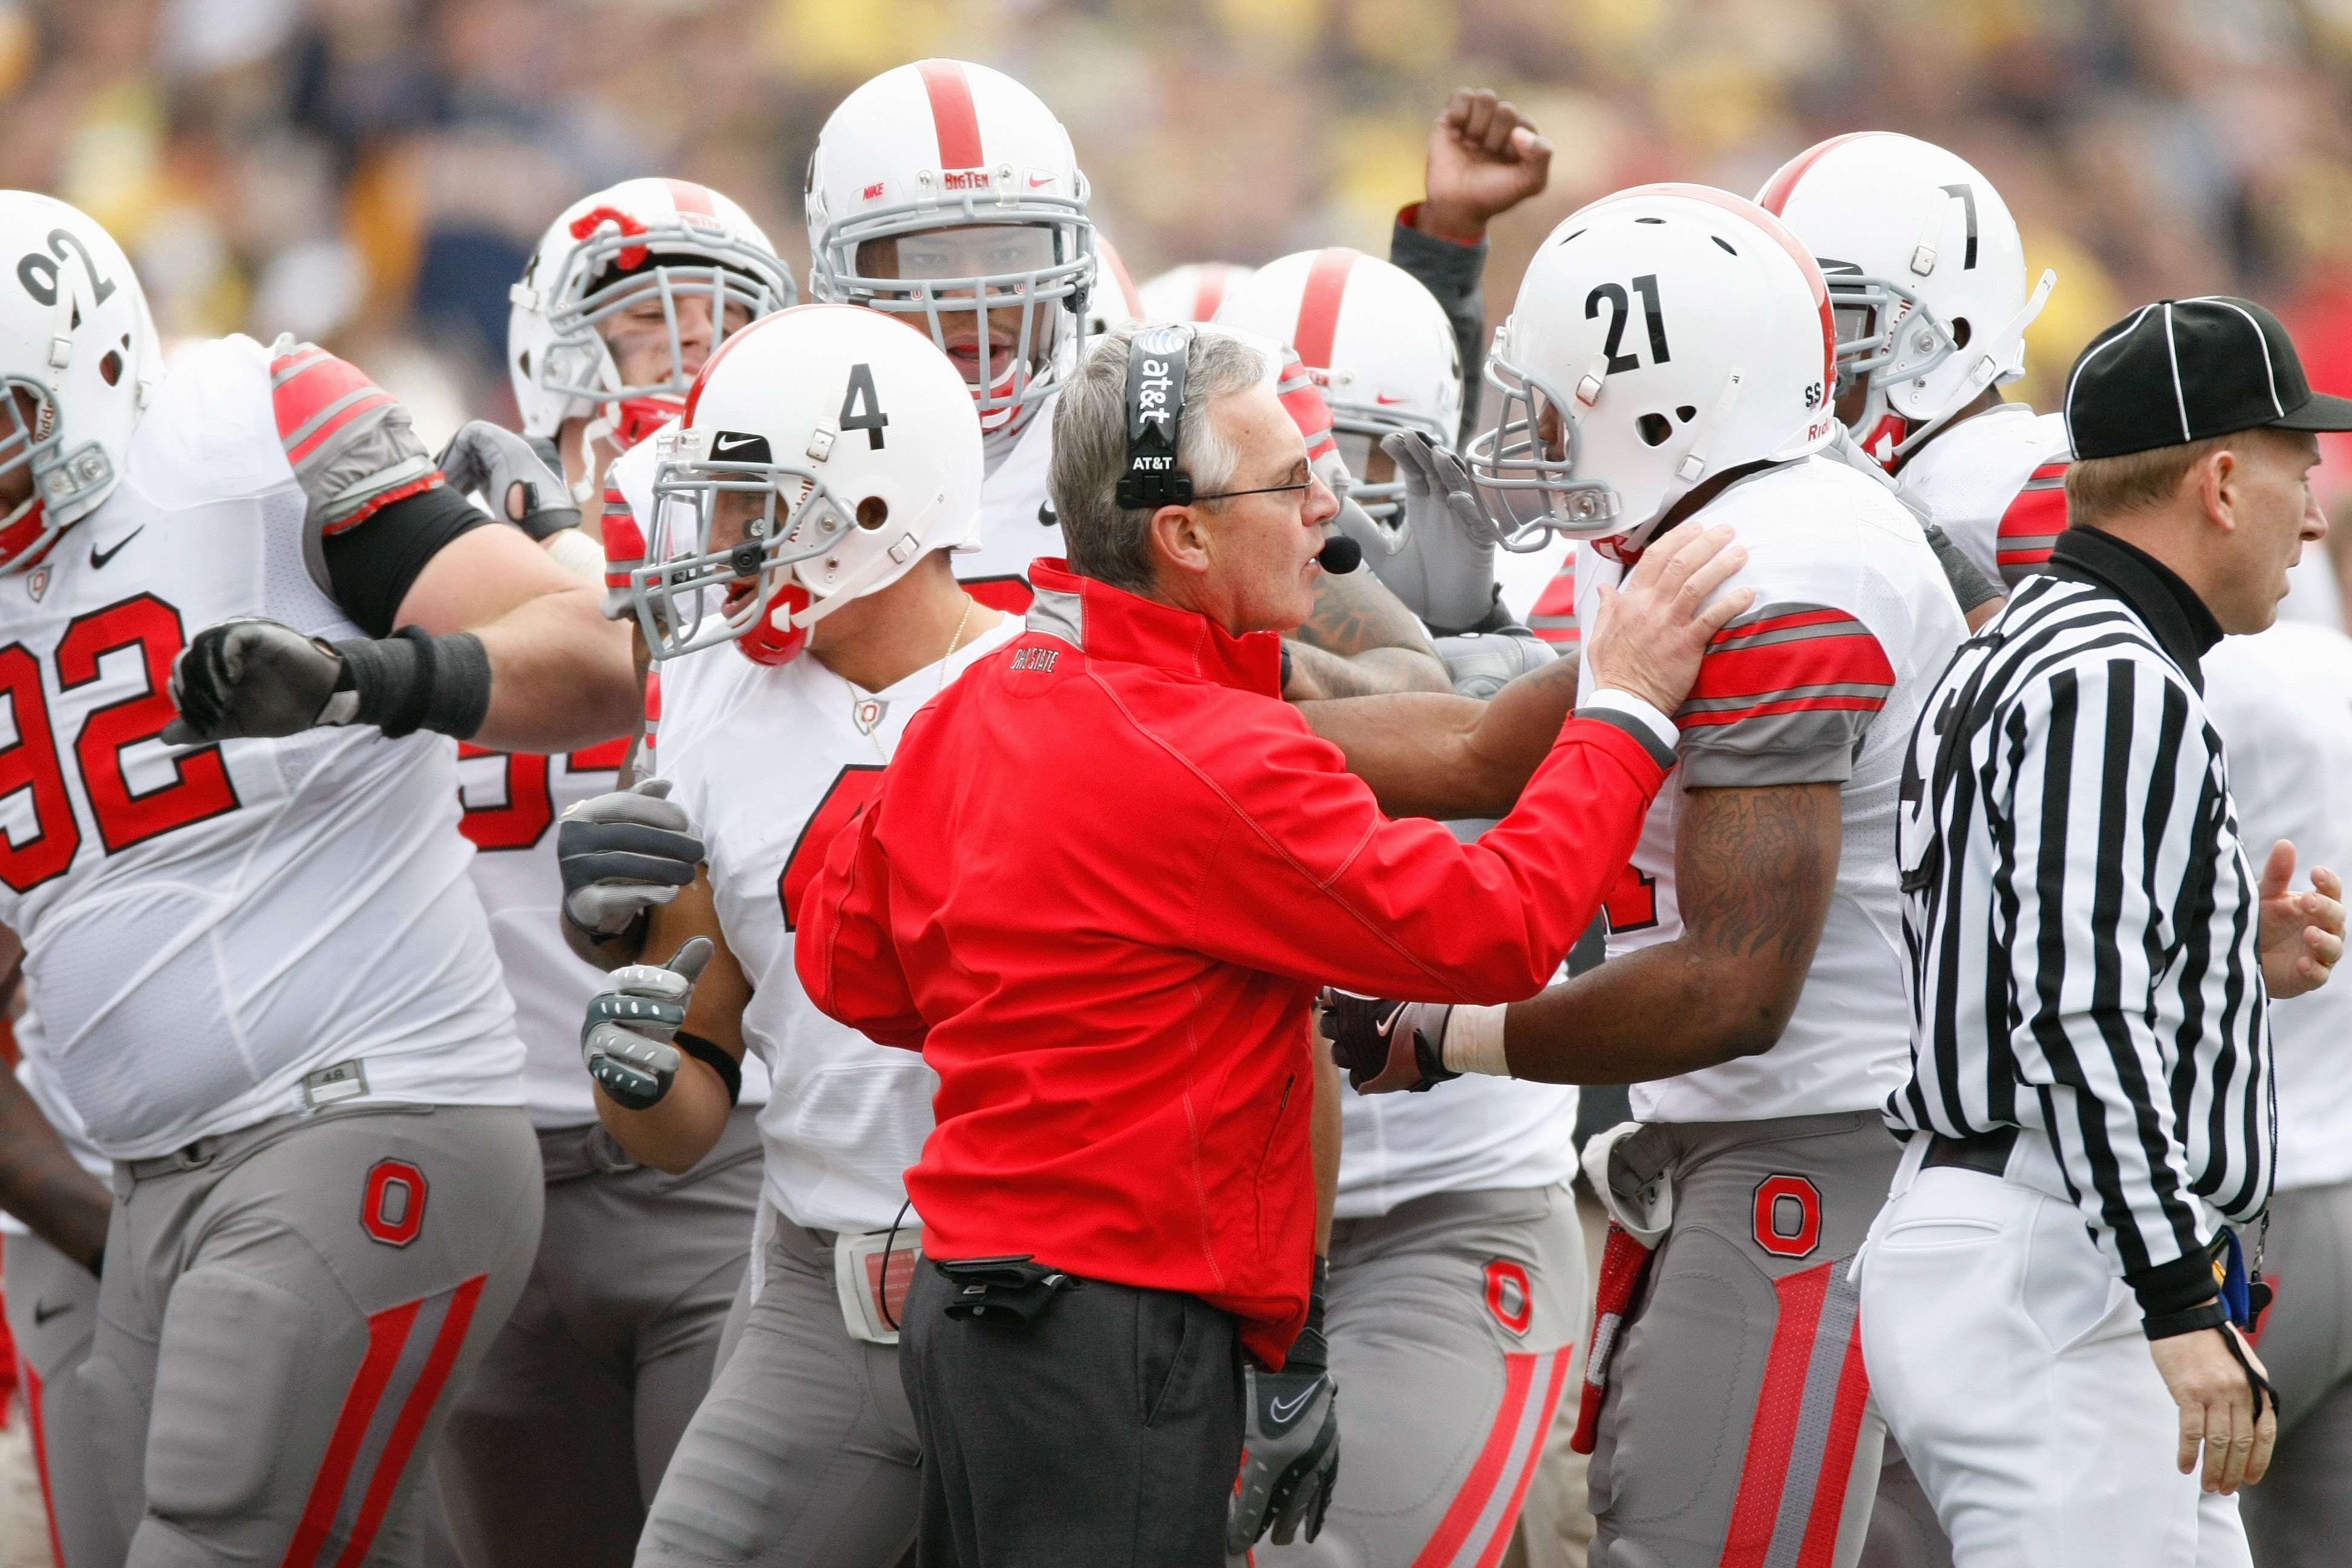 ANN ARBOR, MI - NOVEMBER 21: Head coach Jim Tressel of the Ohio State Buckeyes encourages his players before the game against the Michigan Wolverines on November 21, 2009 at Michigan Stadium in Ann Arbor, Michigan. Ohio State won the game 21-10. (Photo by